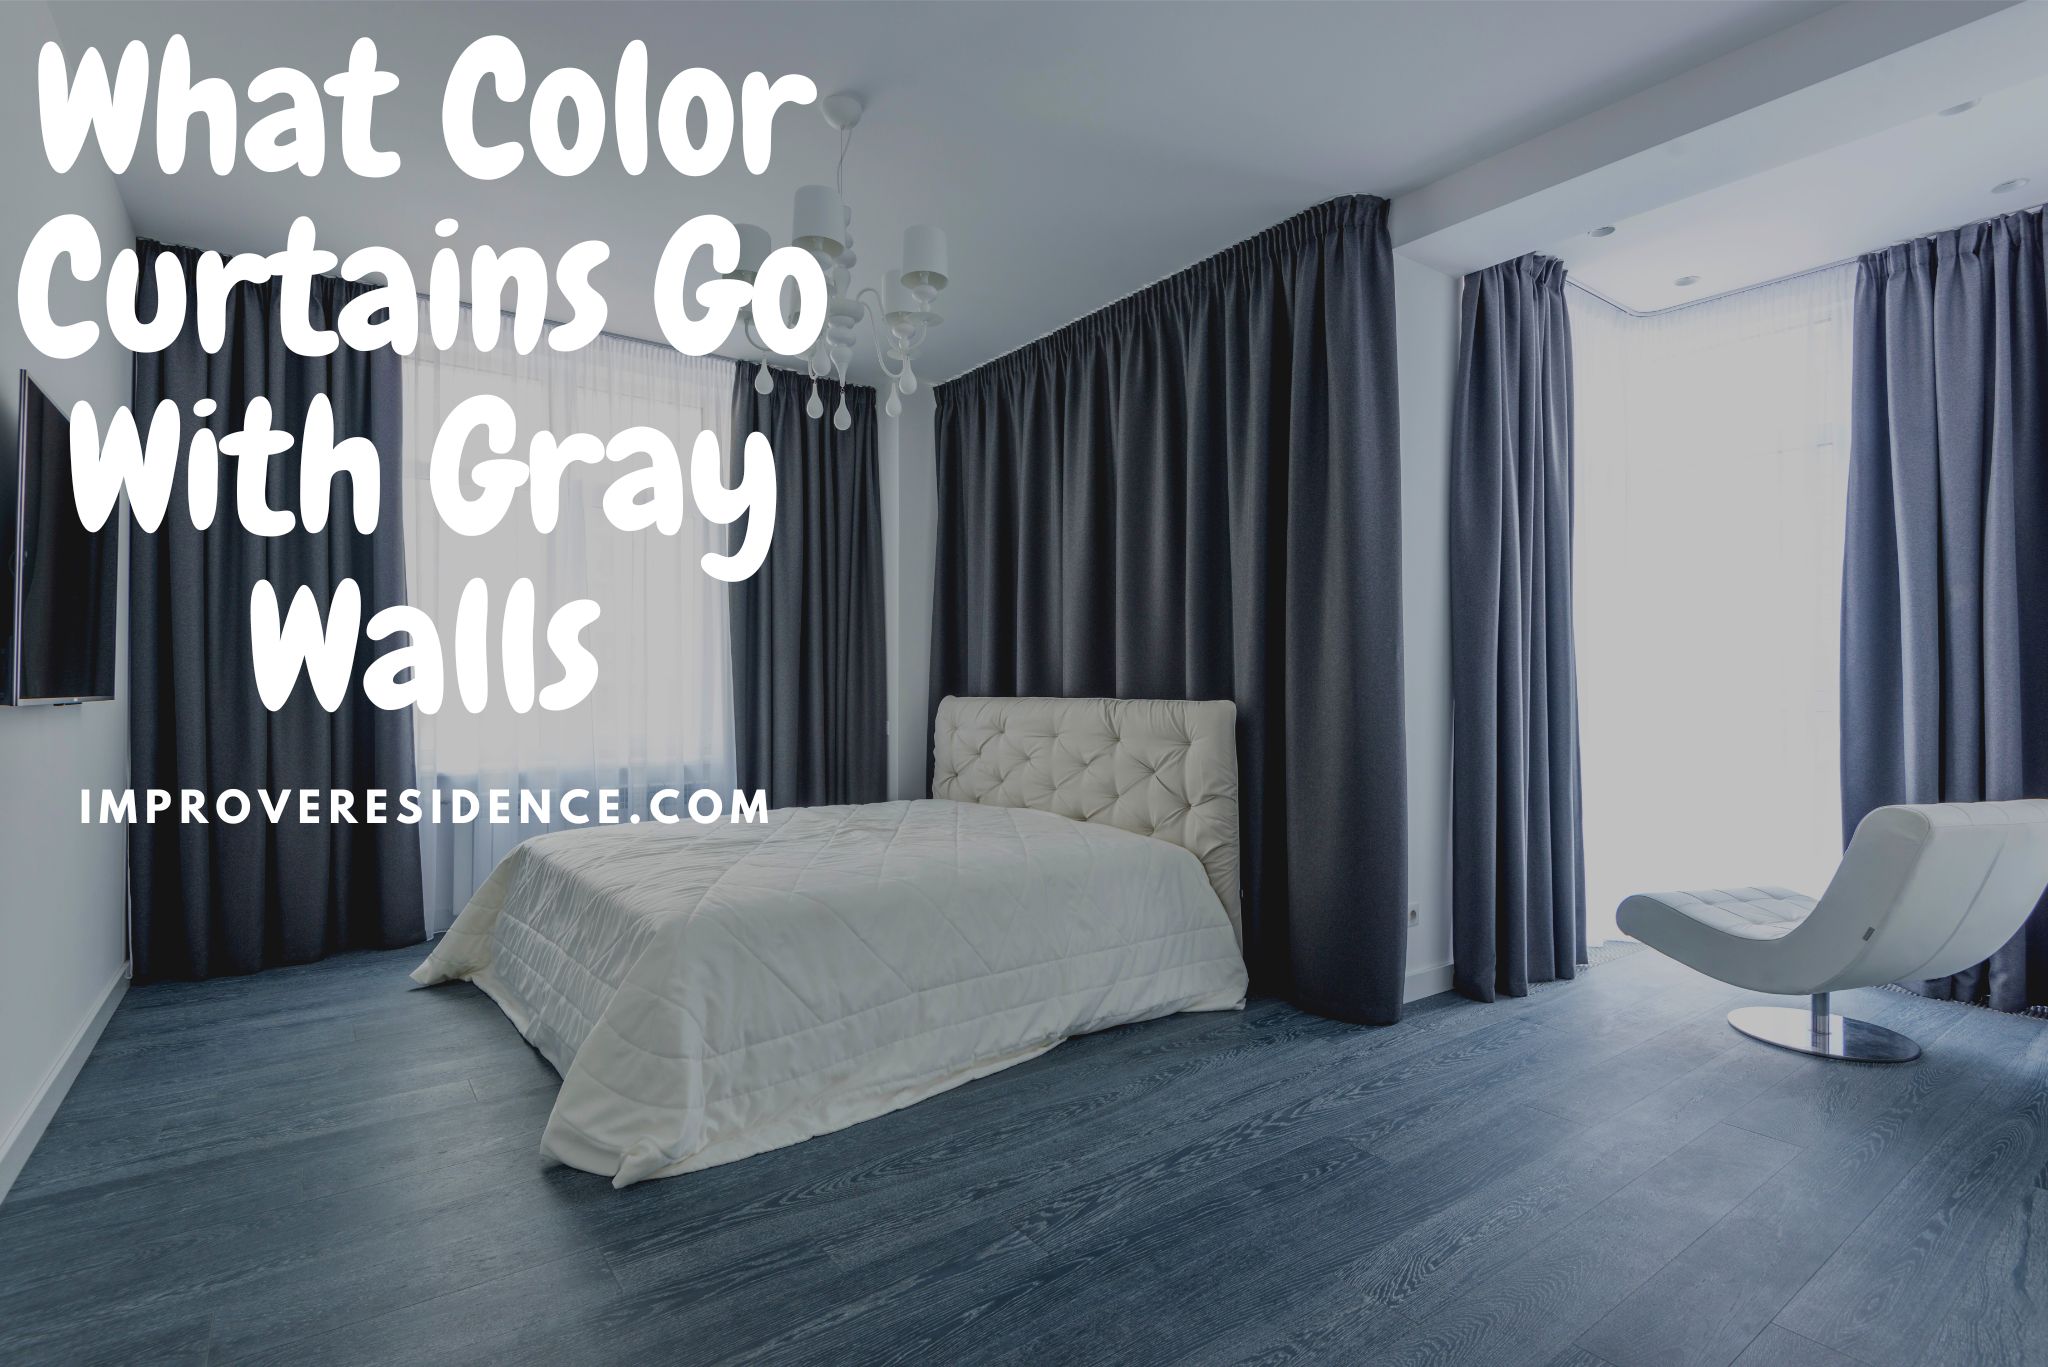 What Color Curtains Go With Gray Walls?